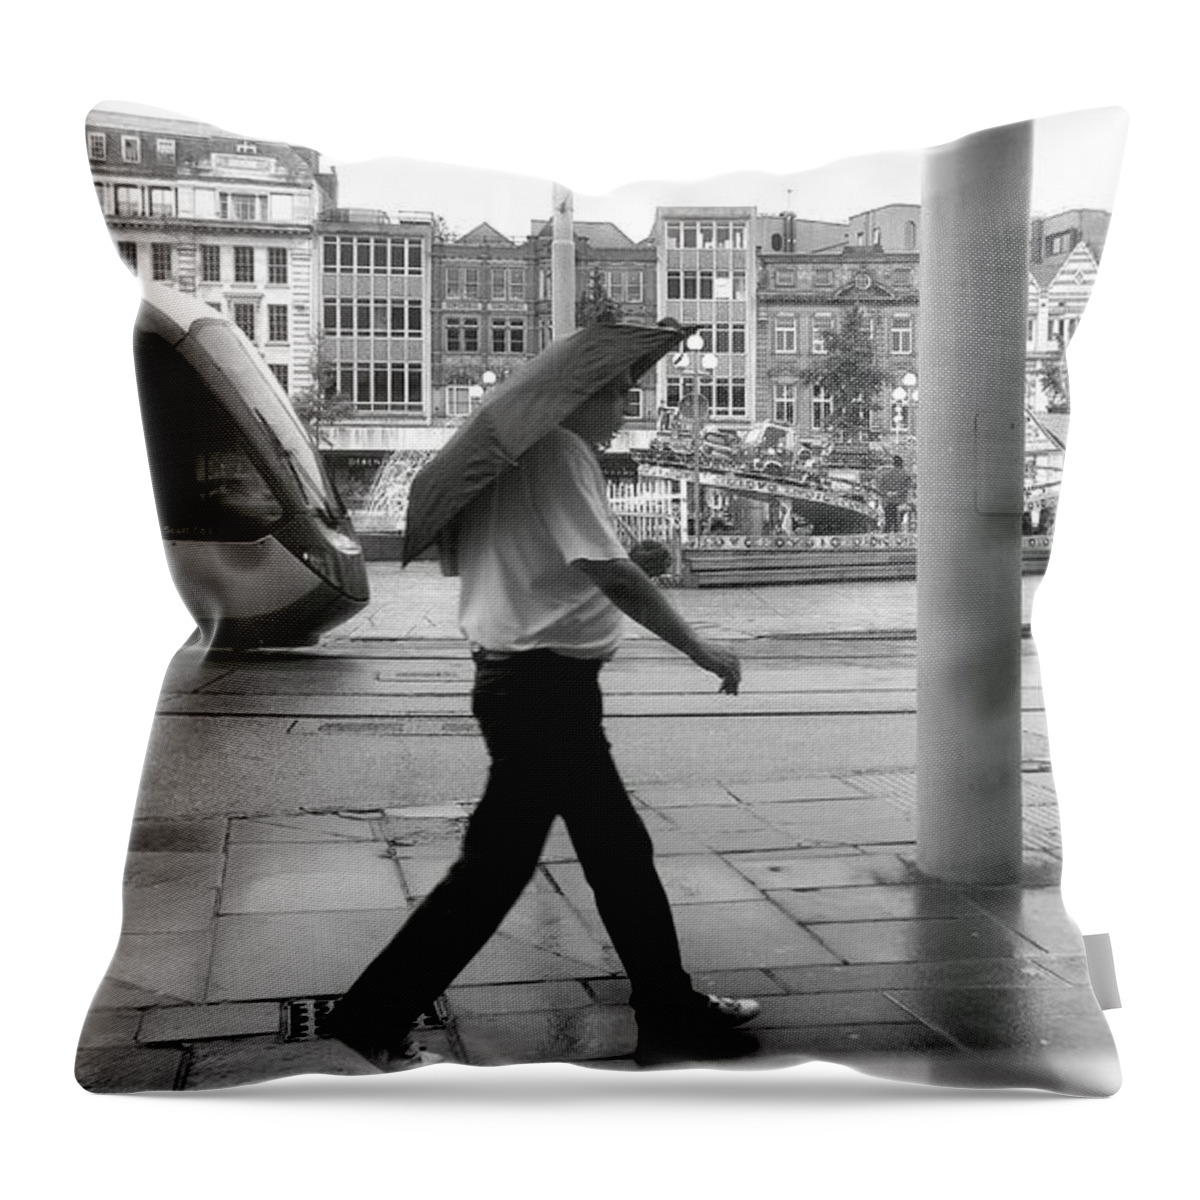 Architecture Throw Pillow featuring the photograph Tram in Rainy City by Ieva Kambarovaite